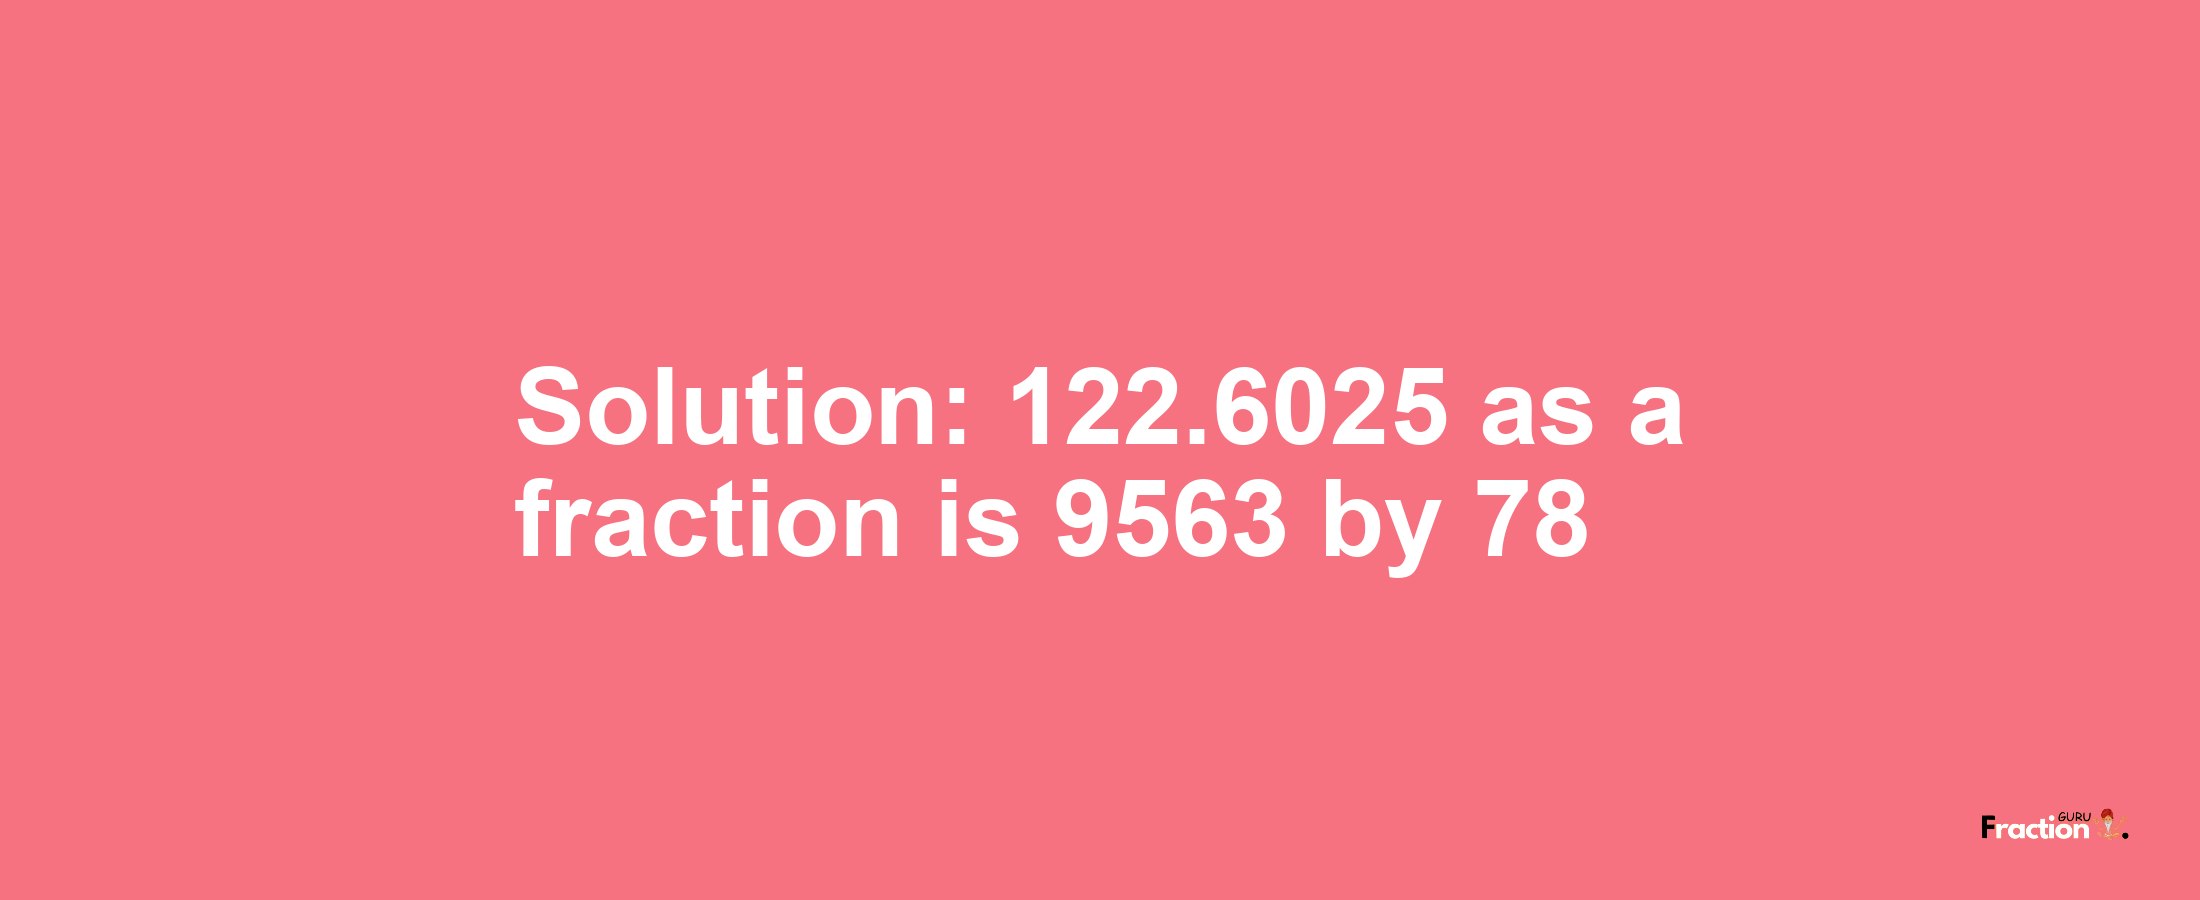 Solution:122.6025 as a fraction is 9563/78